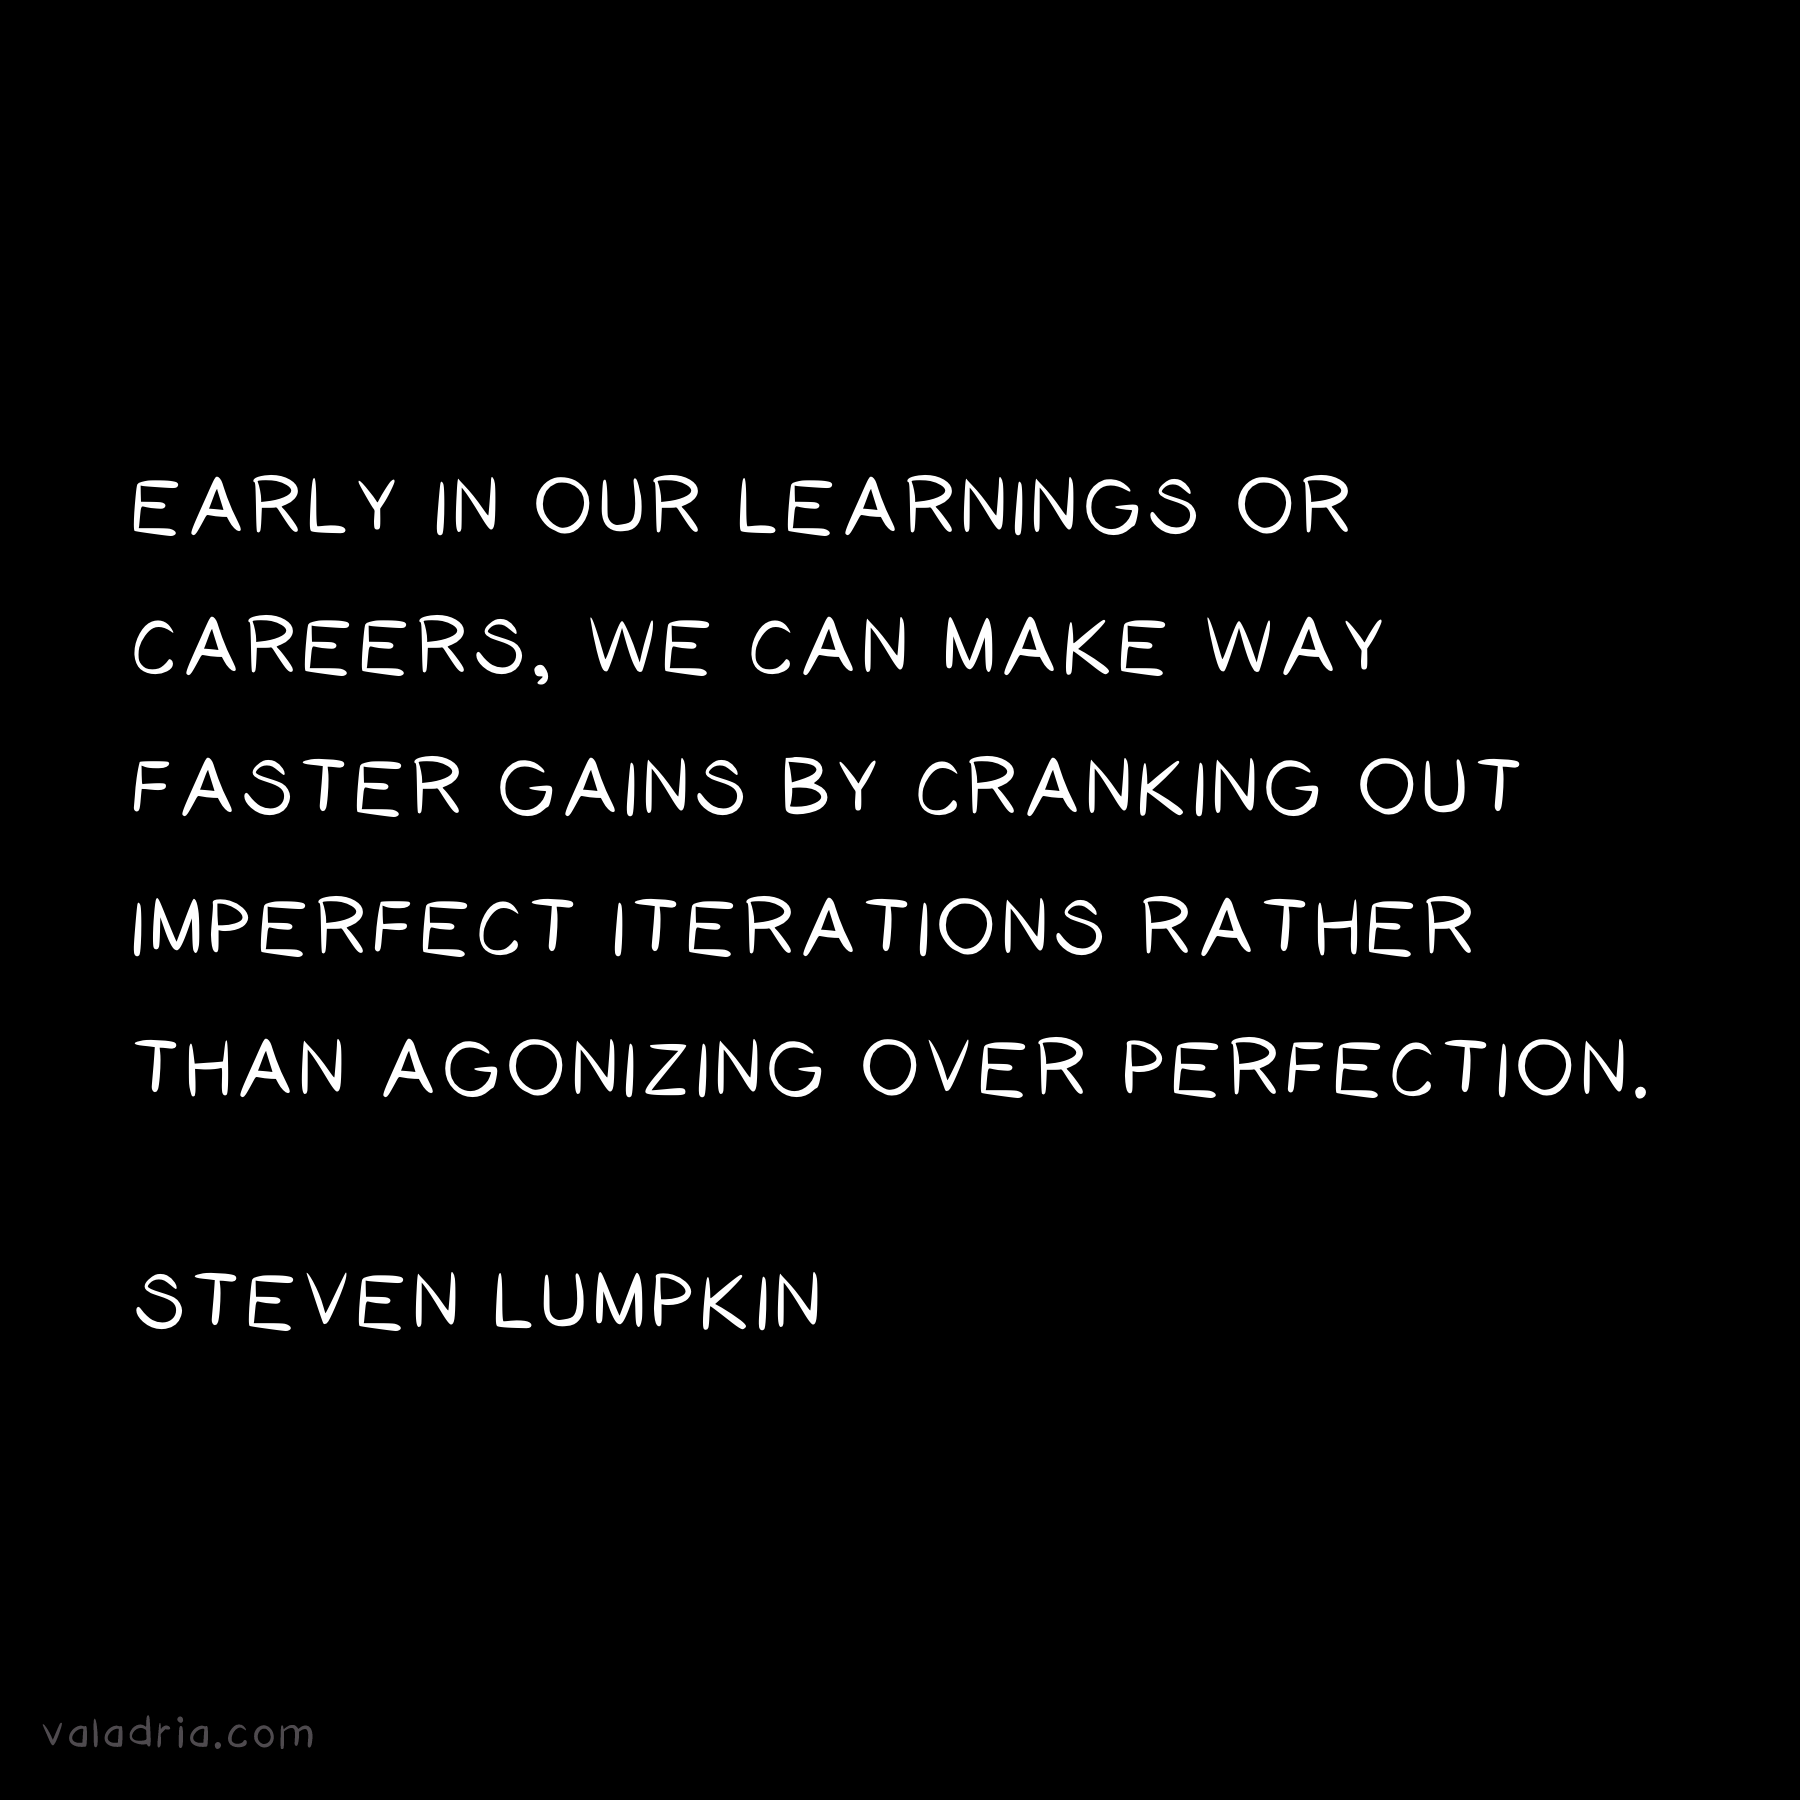 Early in our learnings or careers, we can make way faster gains by cranking out imperfect iterations rather than agonizing over perfection. -Steven Lumpkin